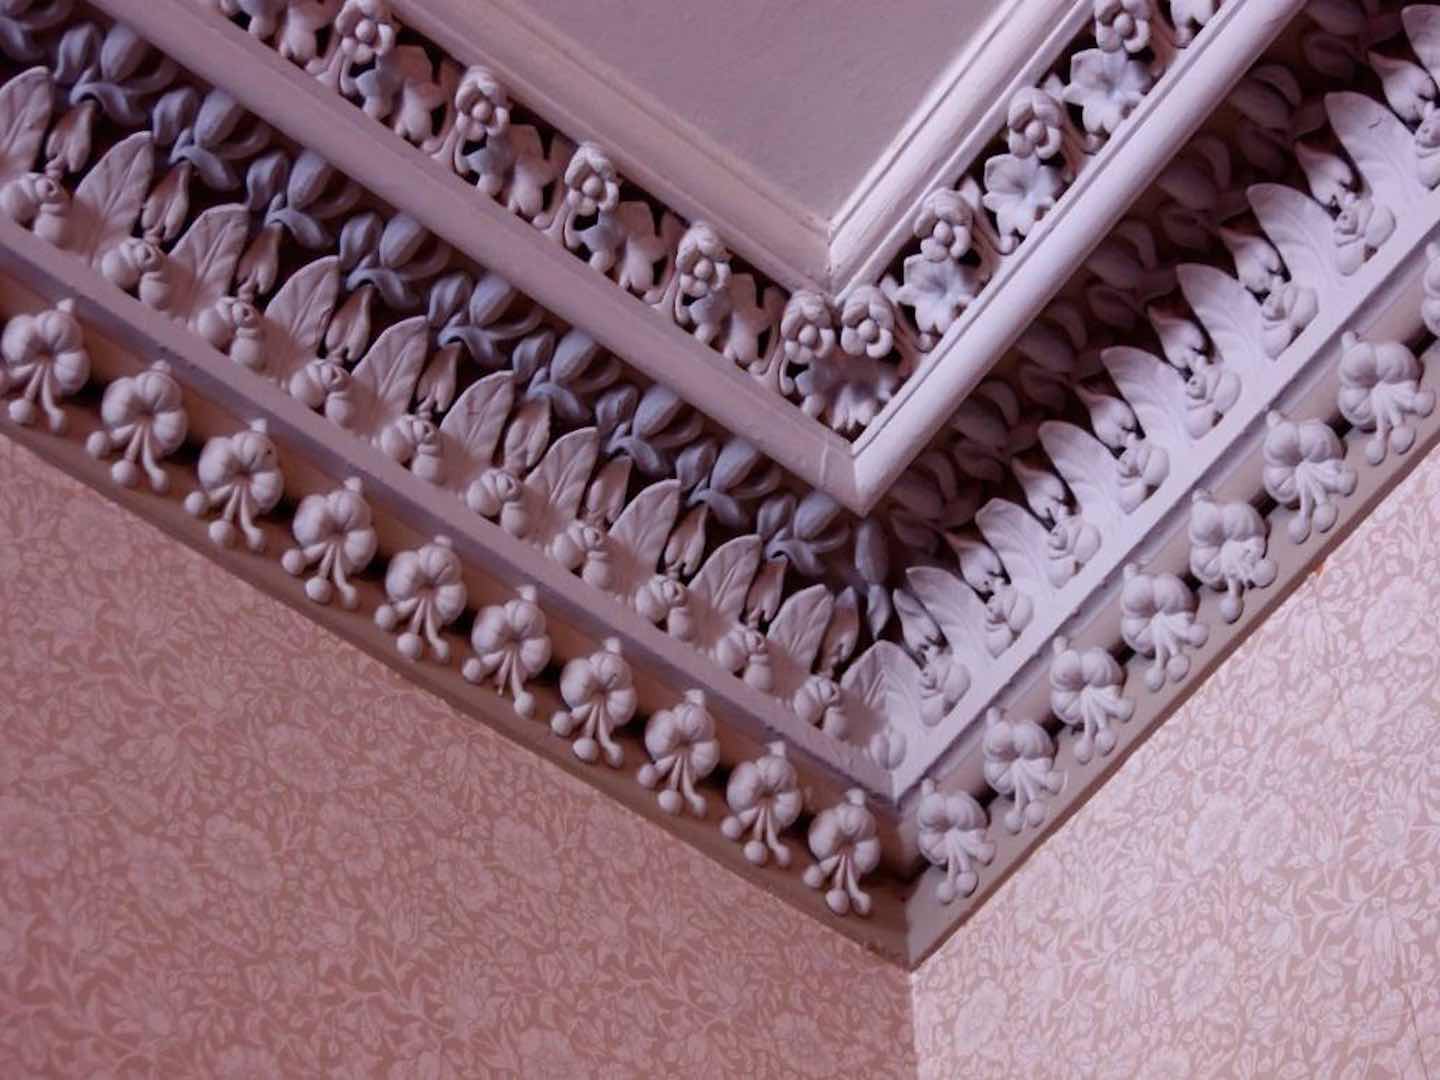 Interior plaster cornices of History House. The cornices feature a floral design.